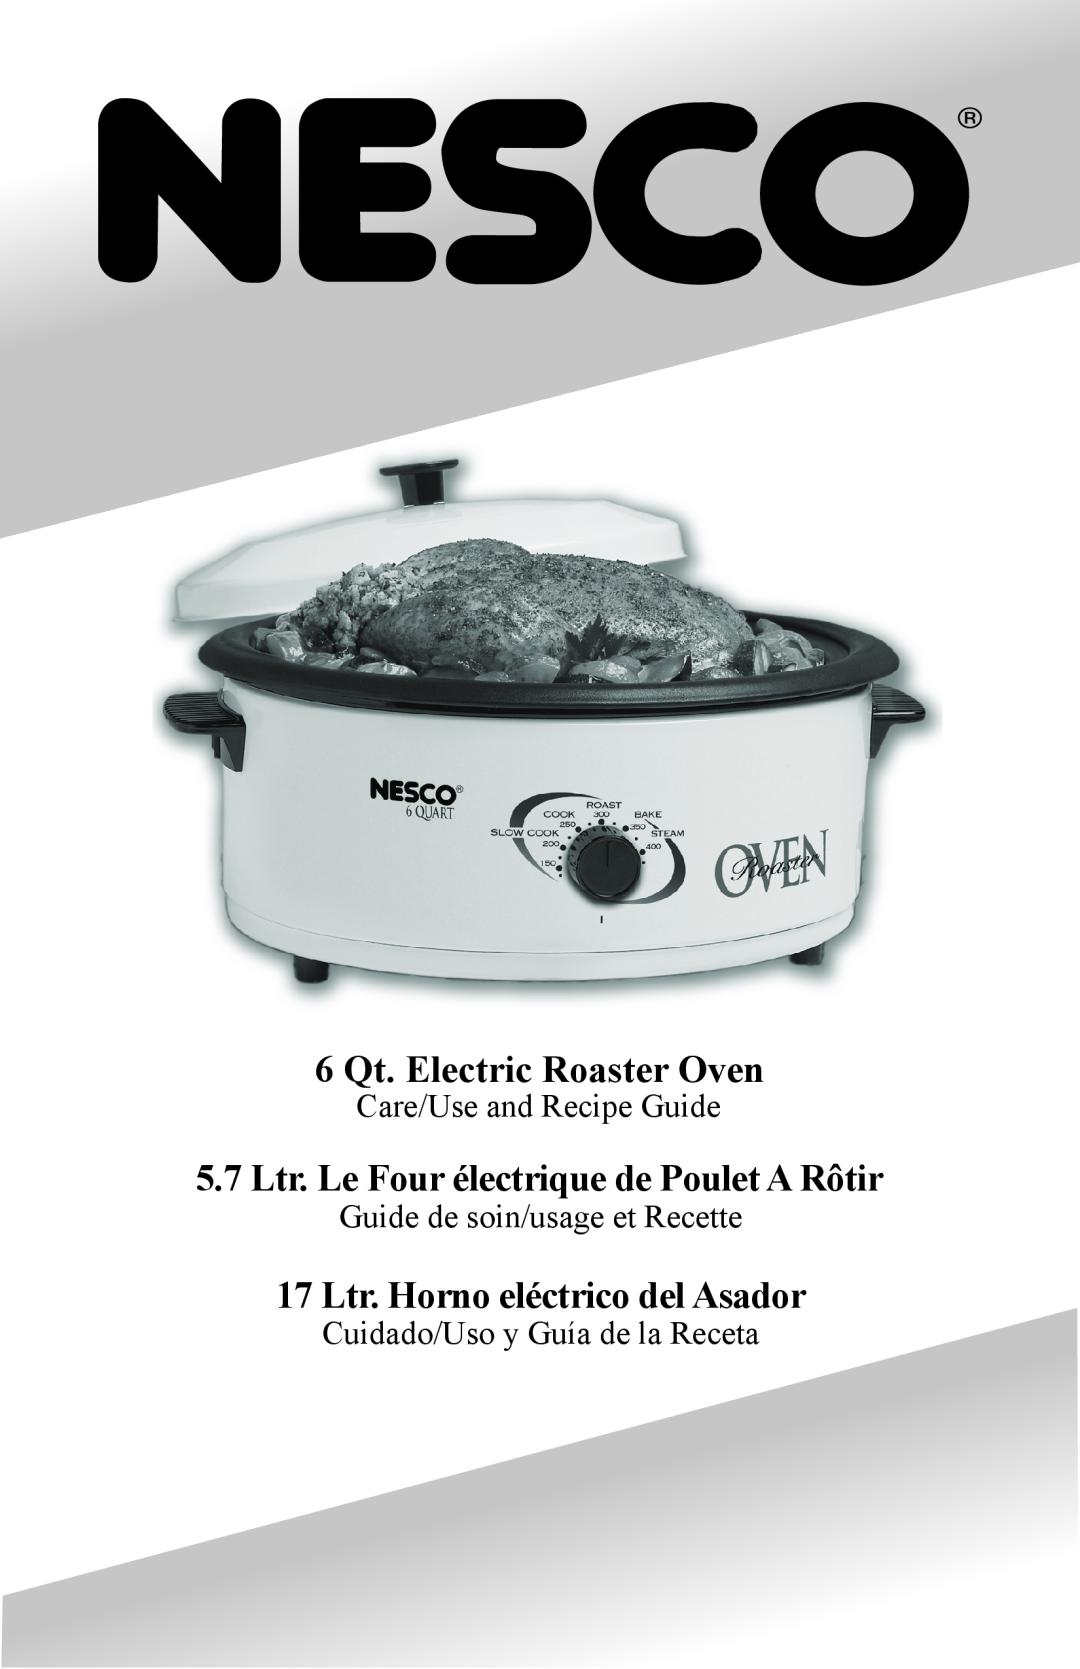 Nesco manual Care/Use and Recipe Guide, Guide de soin/usage et Recette, 6 Qt. Electric Roaster Oven 